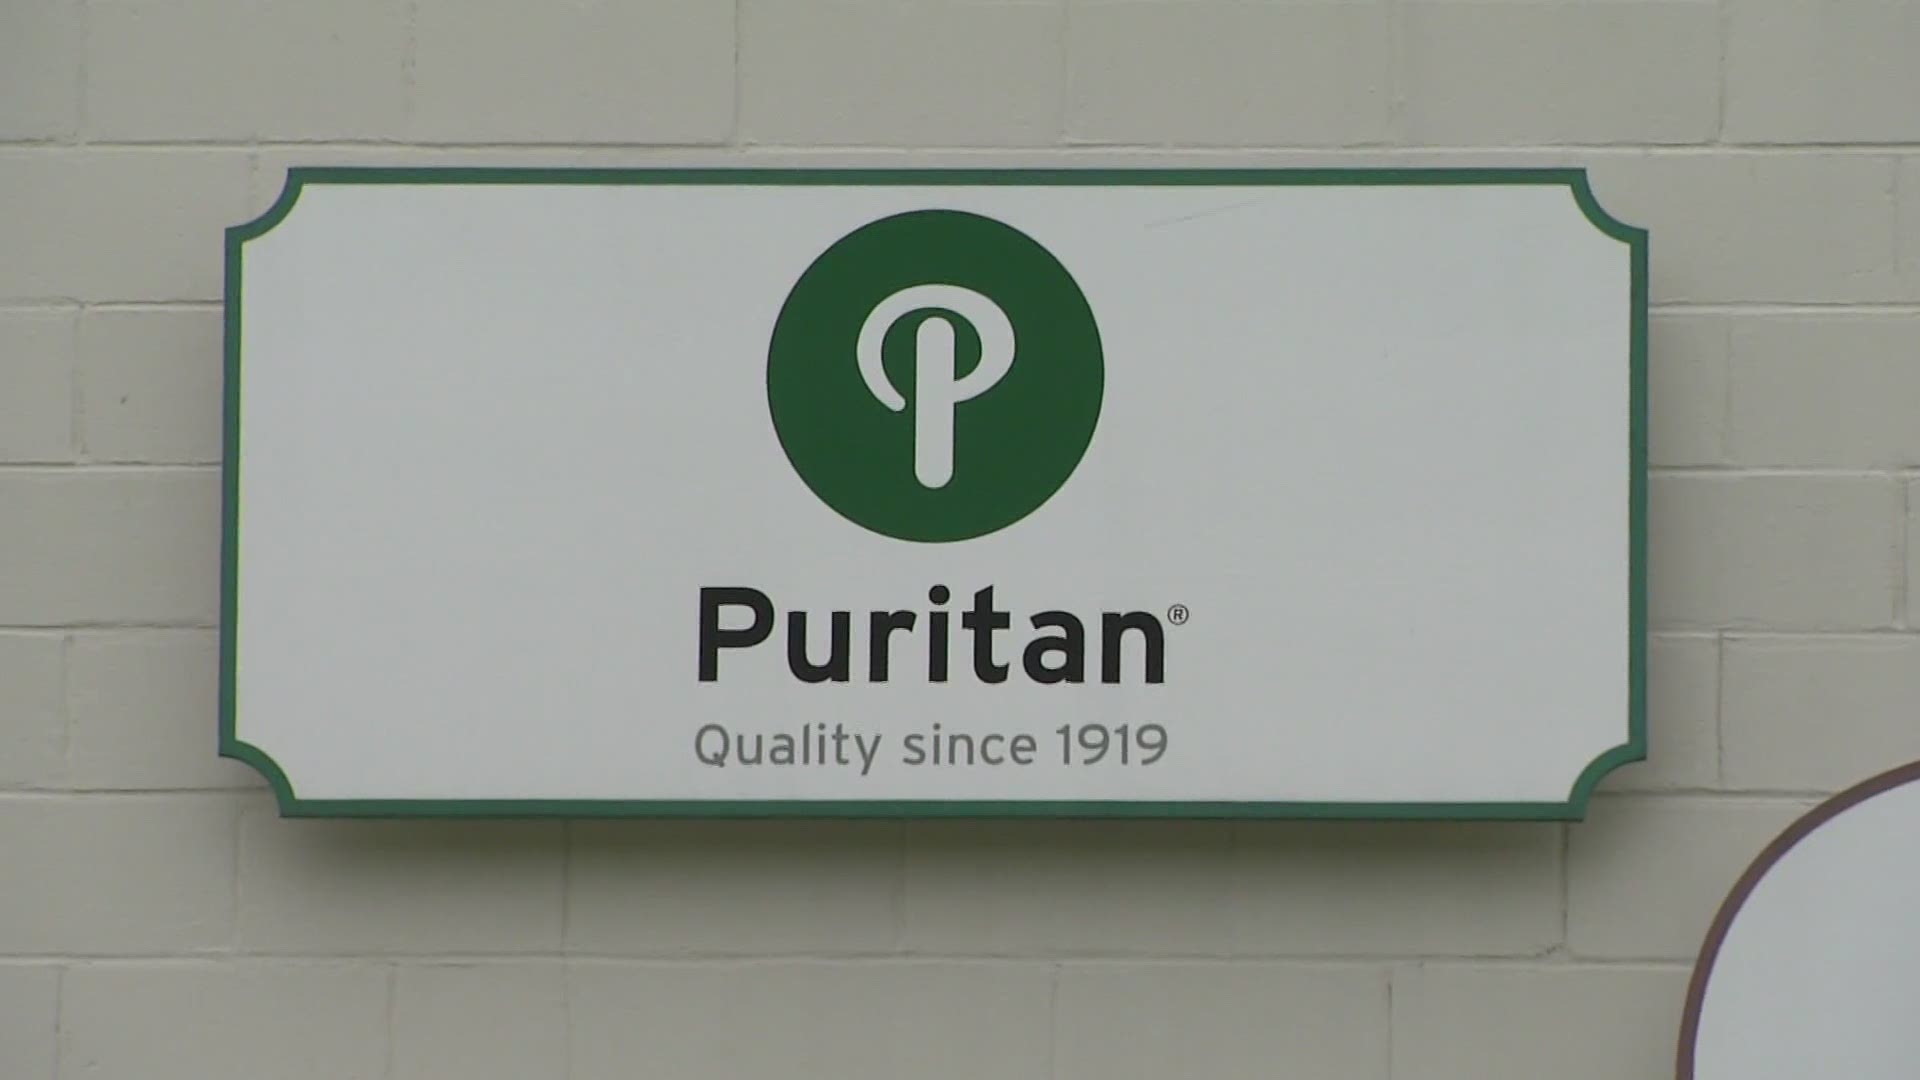 The town of Guilford is getting ready for a visit from President Donald Trump. The President plans to visit Puritan Medical, a big maker of COVID-19 testing swabs.